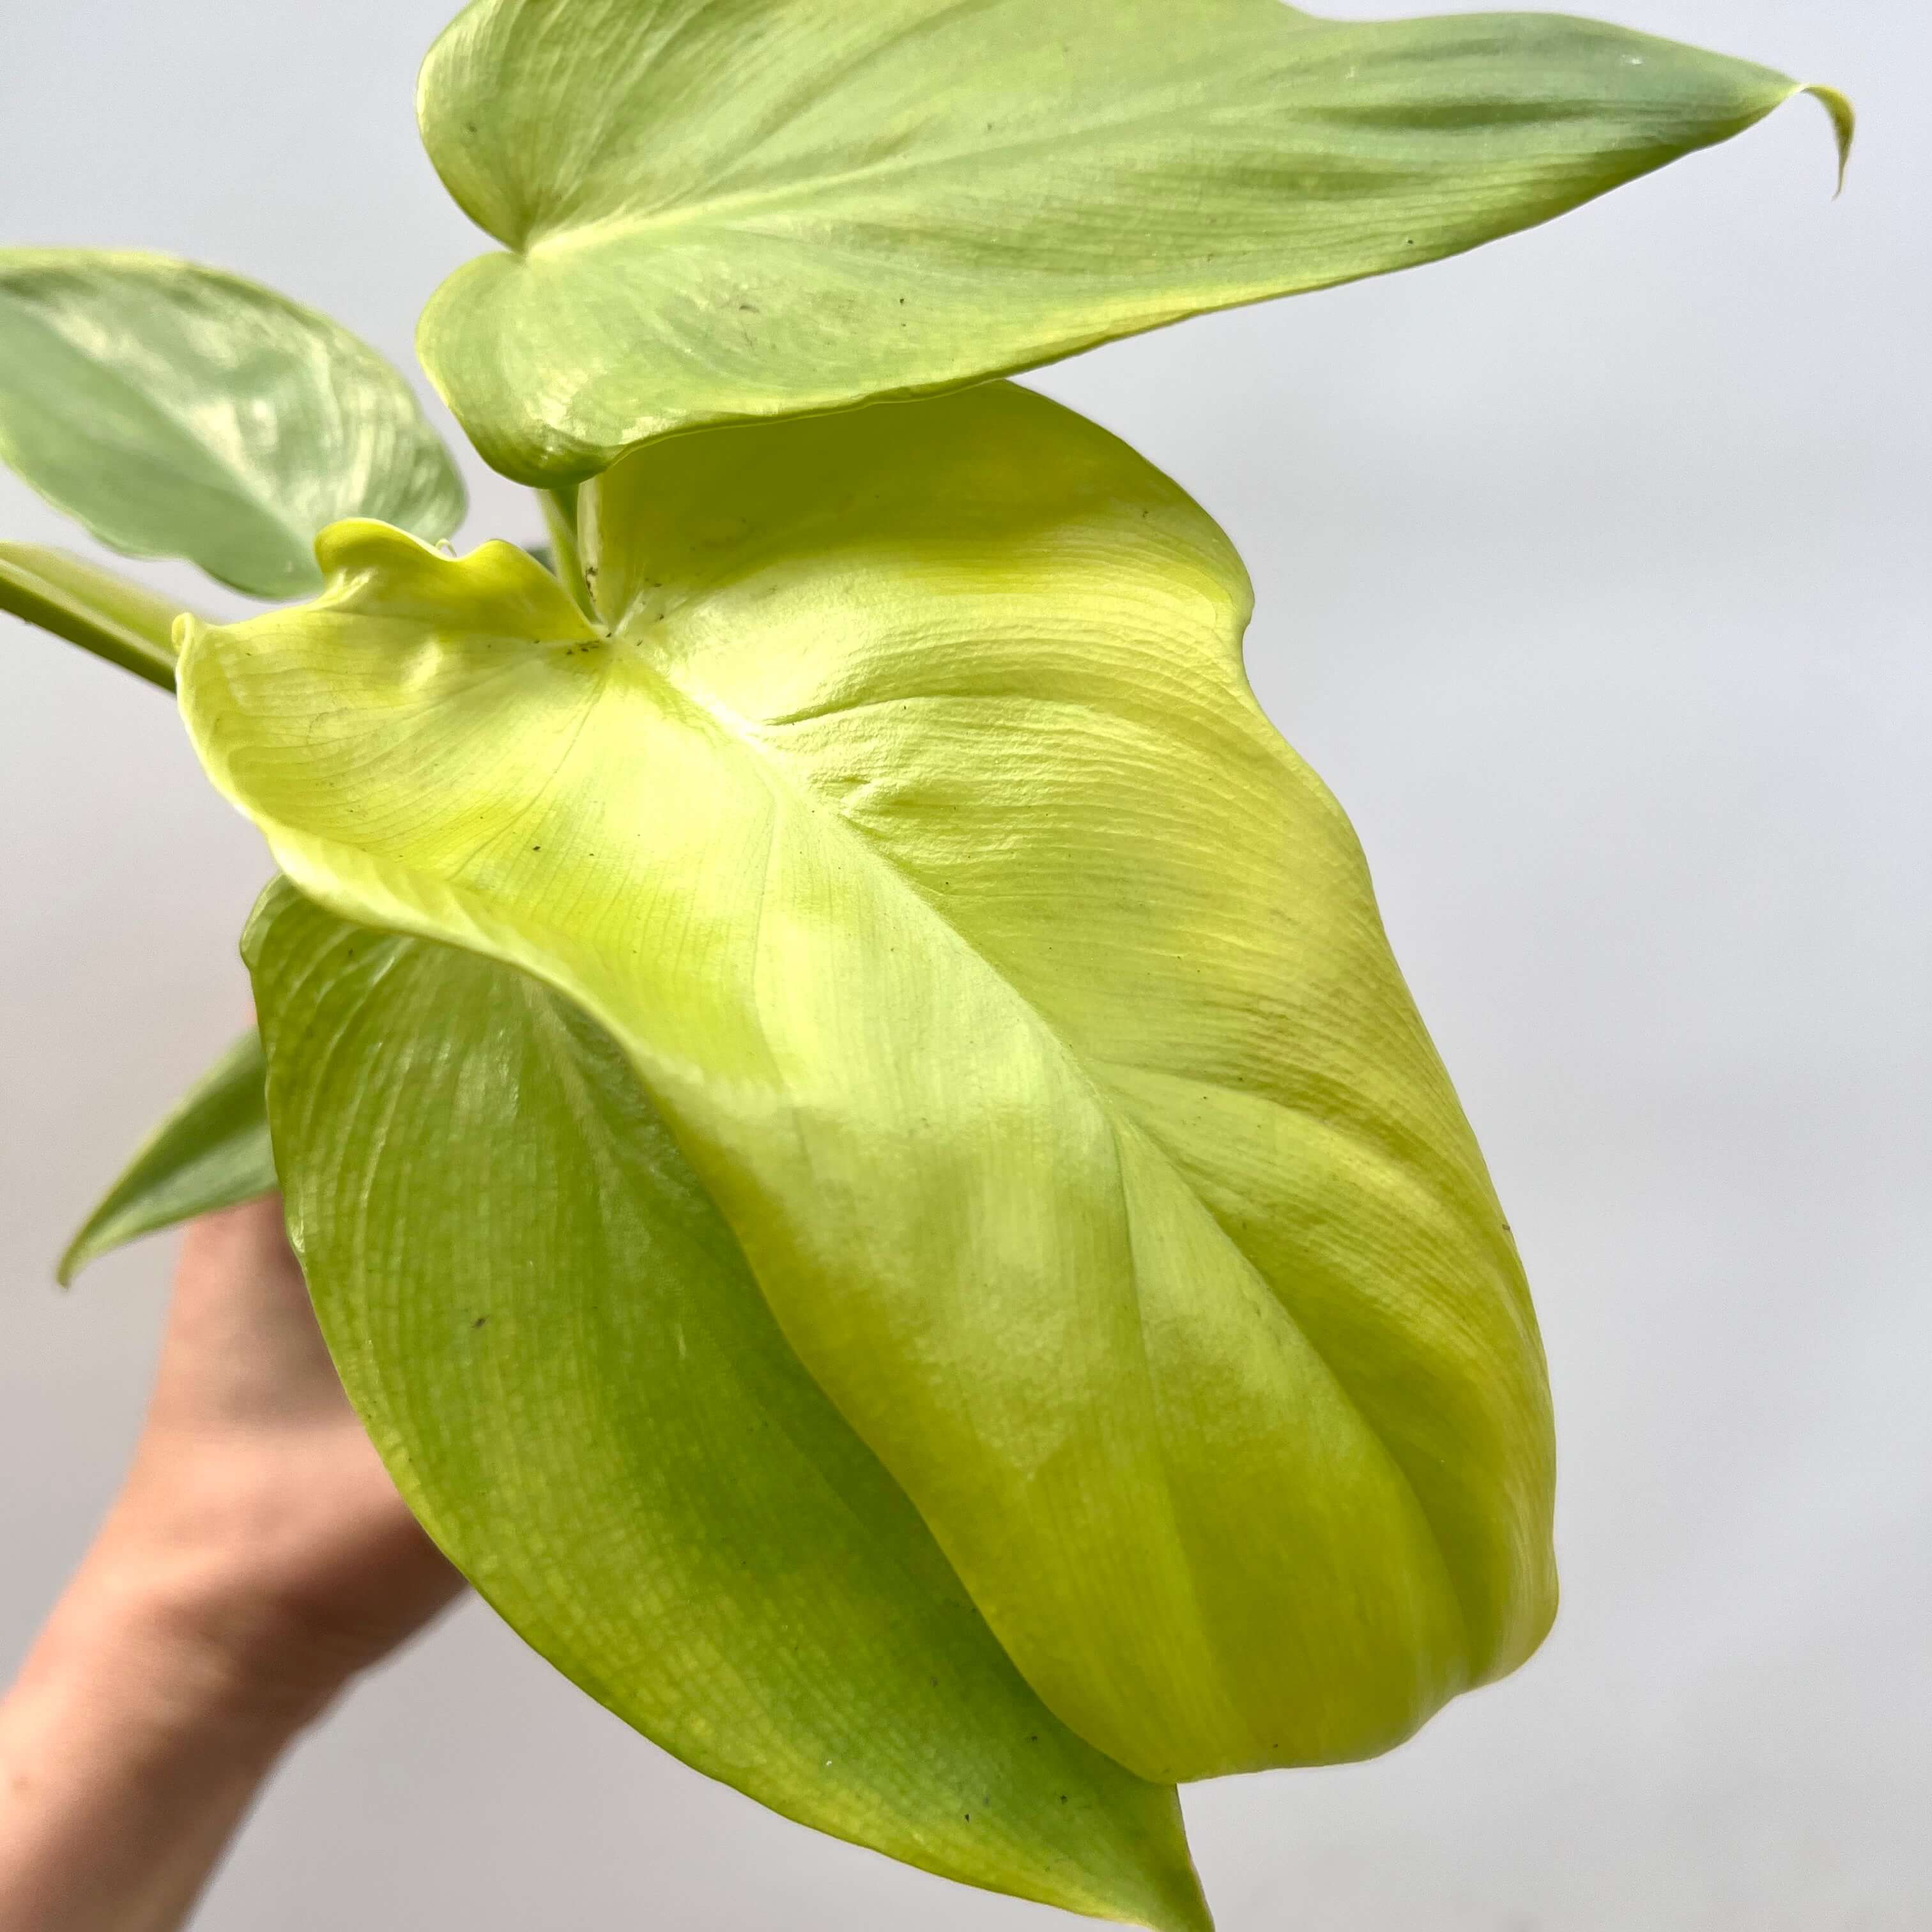 Philodendron Golden Violin